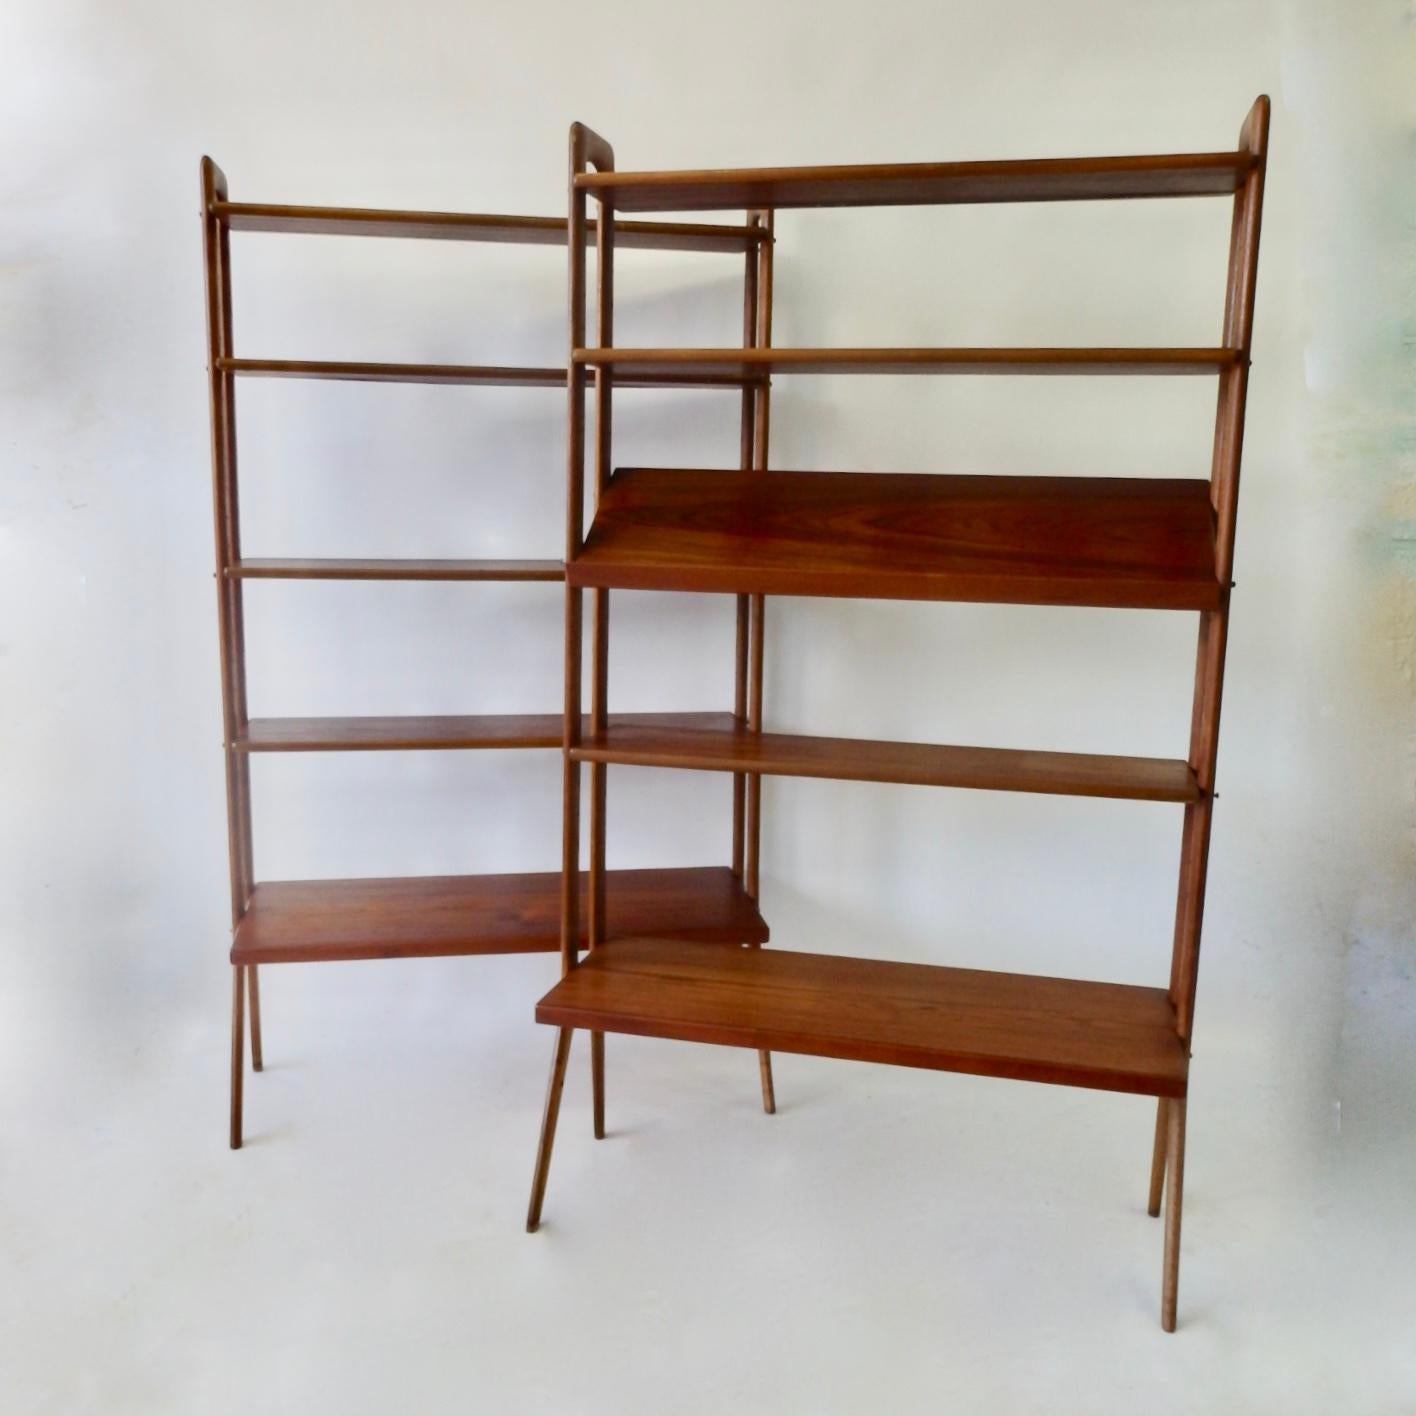 Pair of modular and adjustable Danish teak wood bookshelves or room divider. Designed by Kurt Ostervig crafted by Povl Dinesen. Five shelves on each unit. One having an angled magazine or book display shelf. Lower shelf is deeper at 15.75